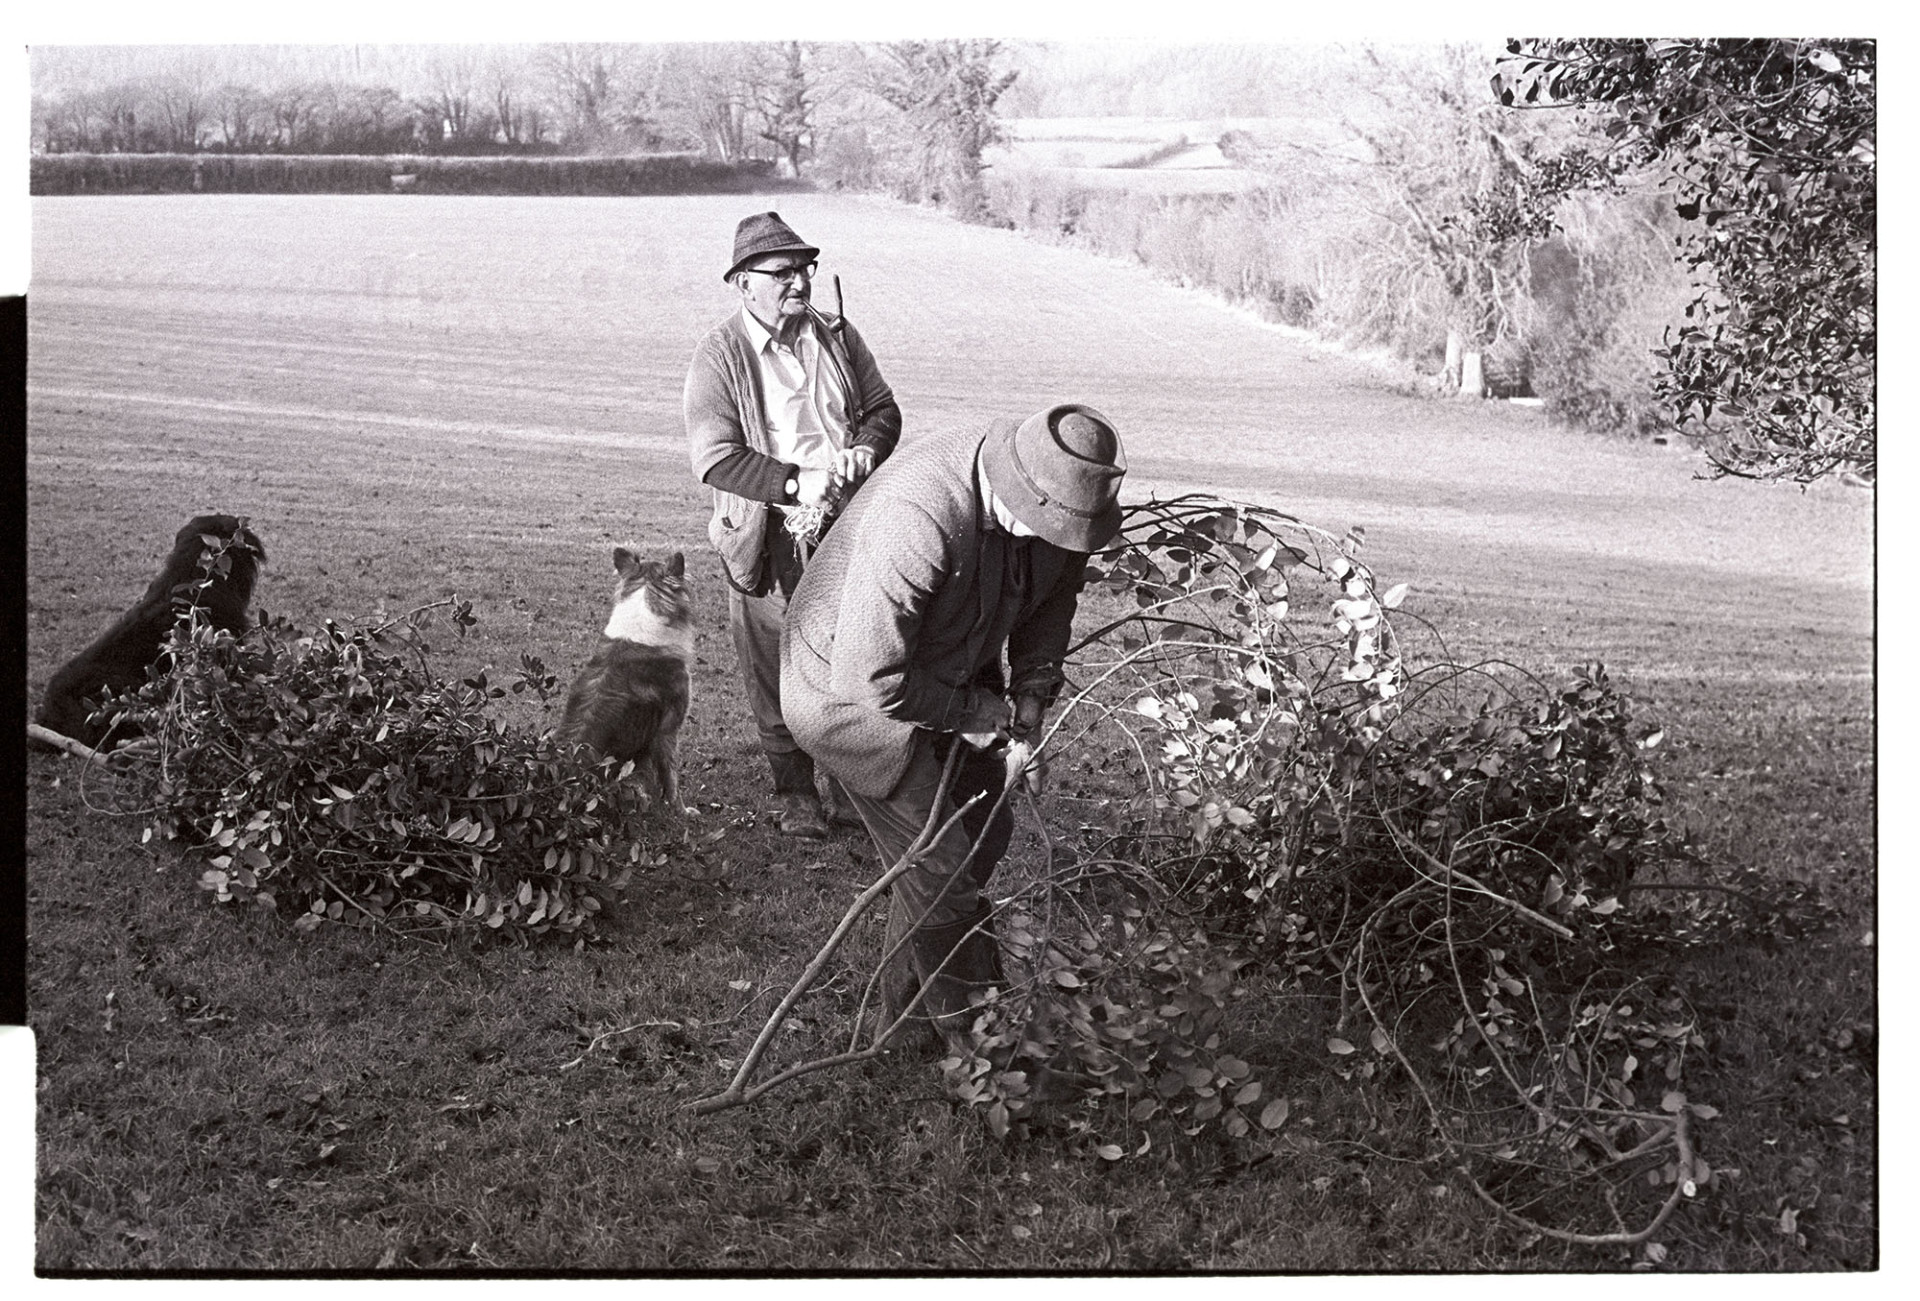 Men bundling up holly for Christmas decorations, dogs.
[Alf Pugsley bundling up holly for Christmas decorations at Langham, Dolton.  Archie Parkhouse and his two dogs are standing in the background. Archie is smoking a pipe.]